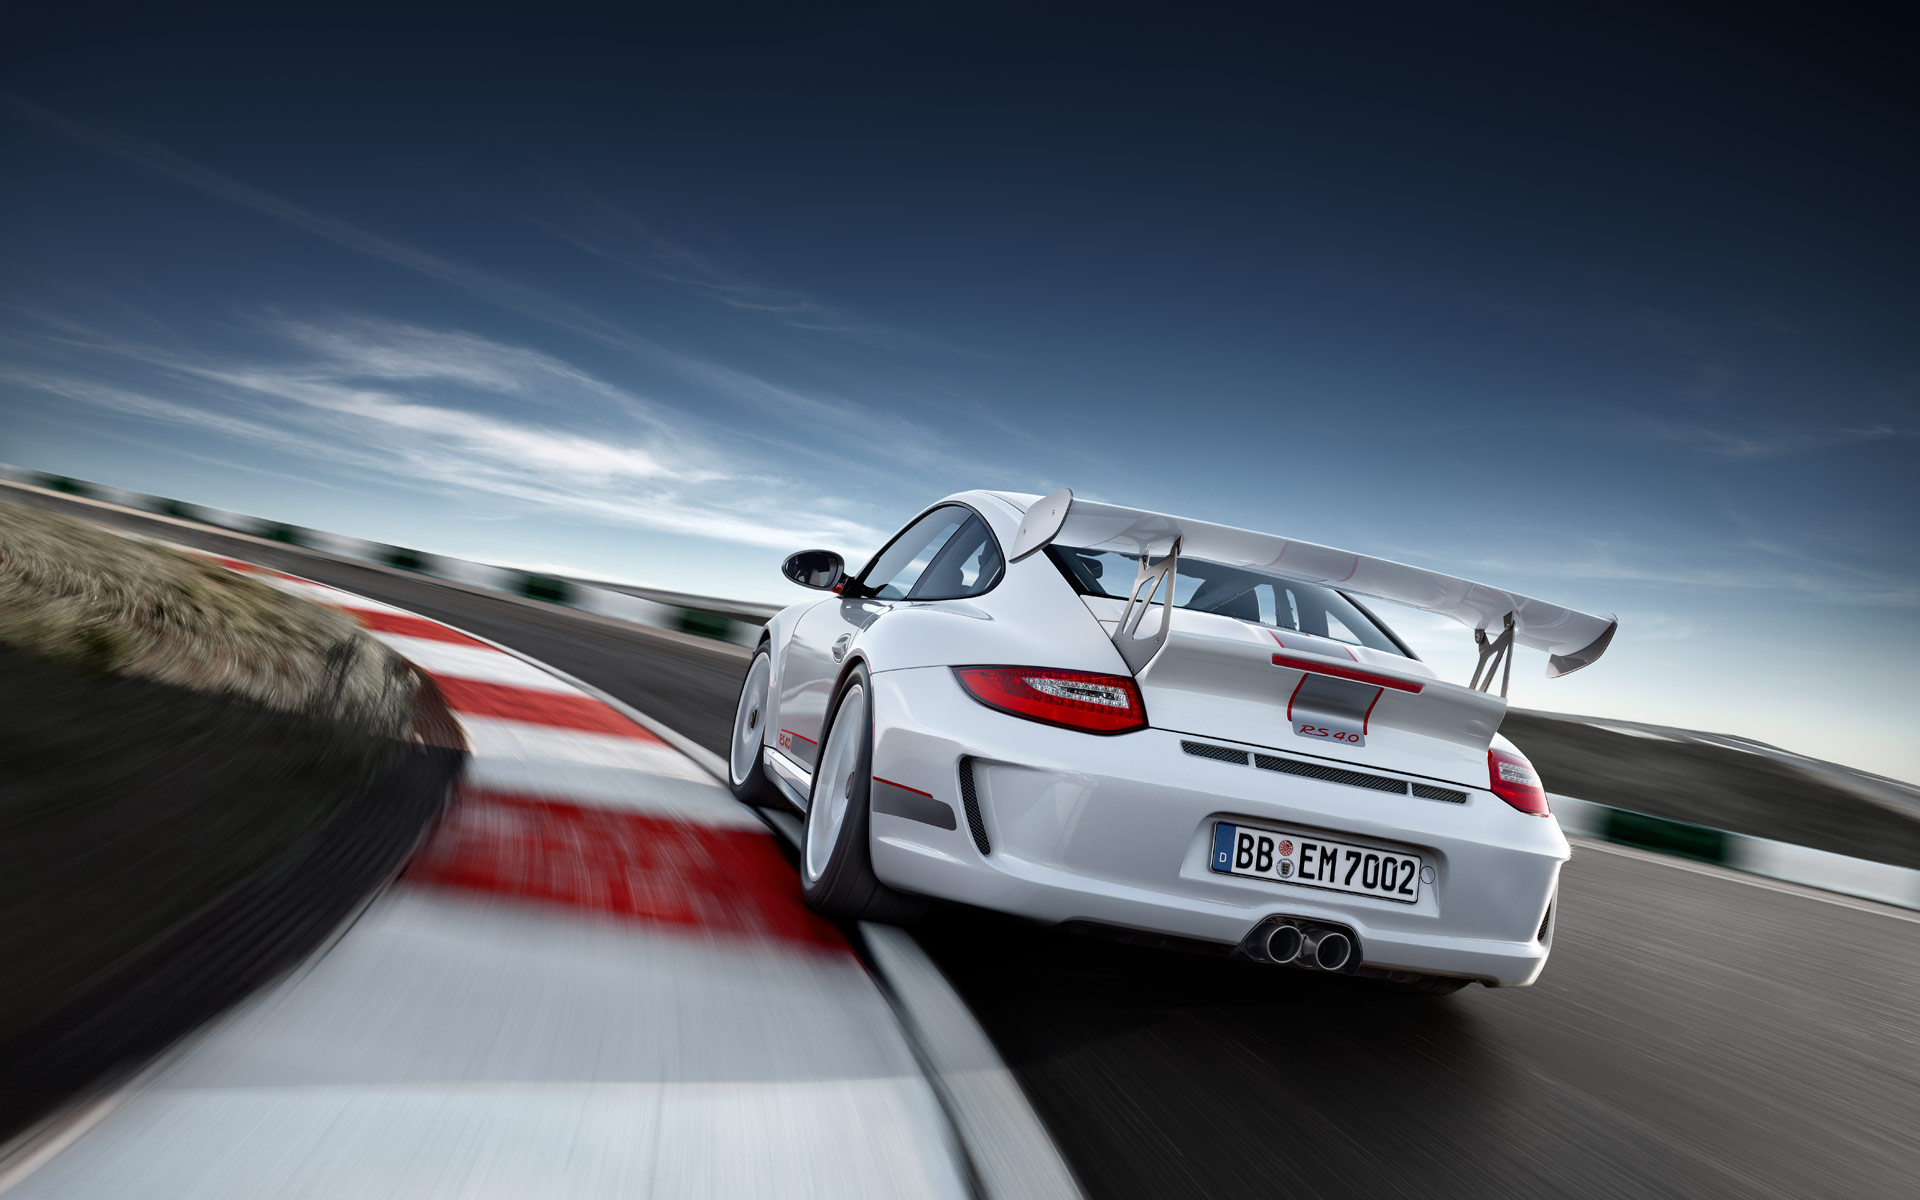 Limited 2011 Porsche 911 GT3 RS 4.0 Rear angle view